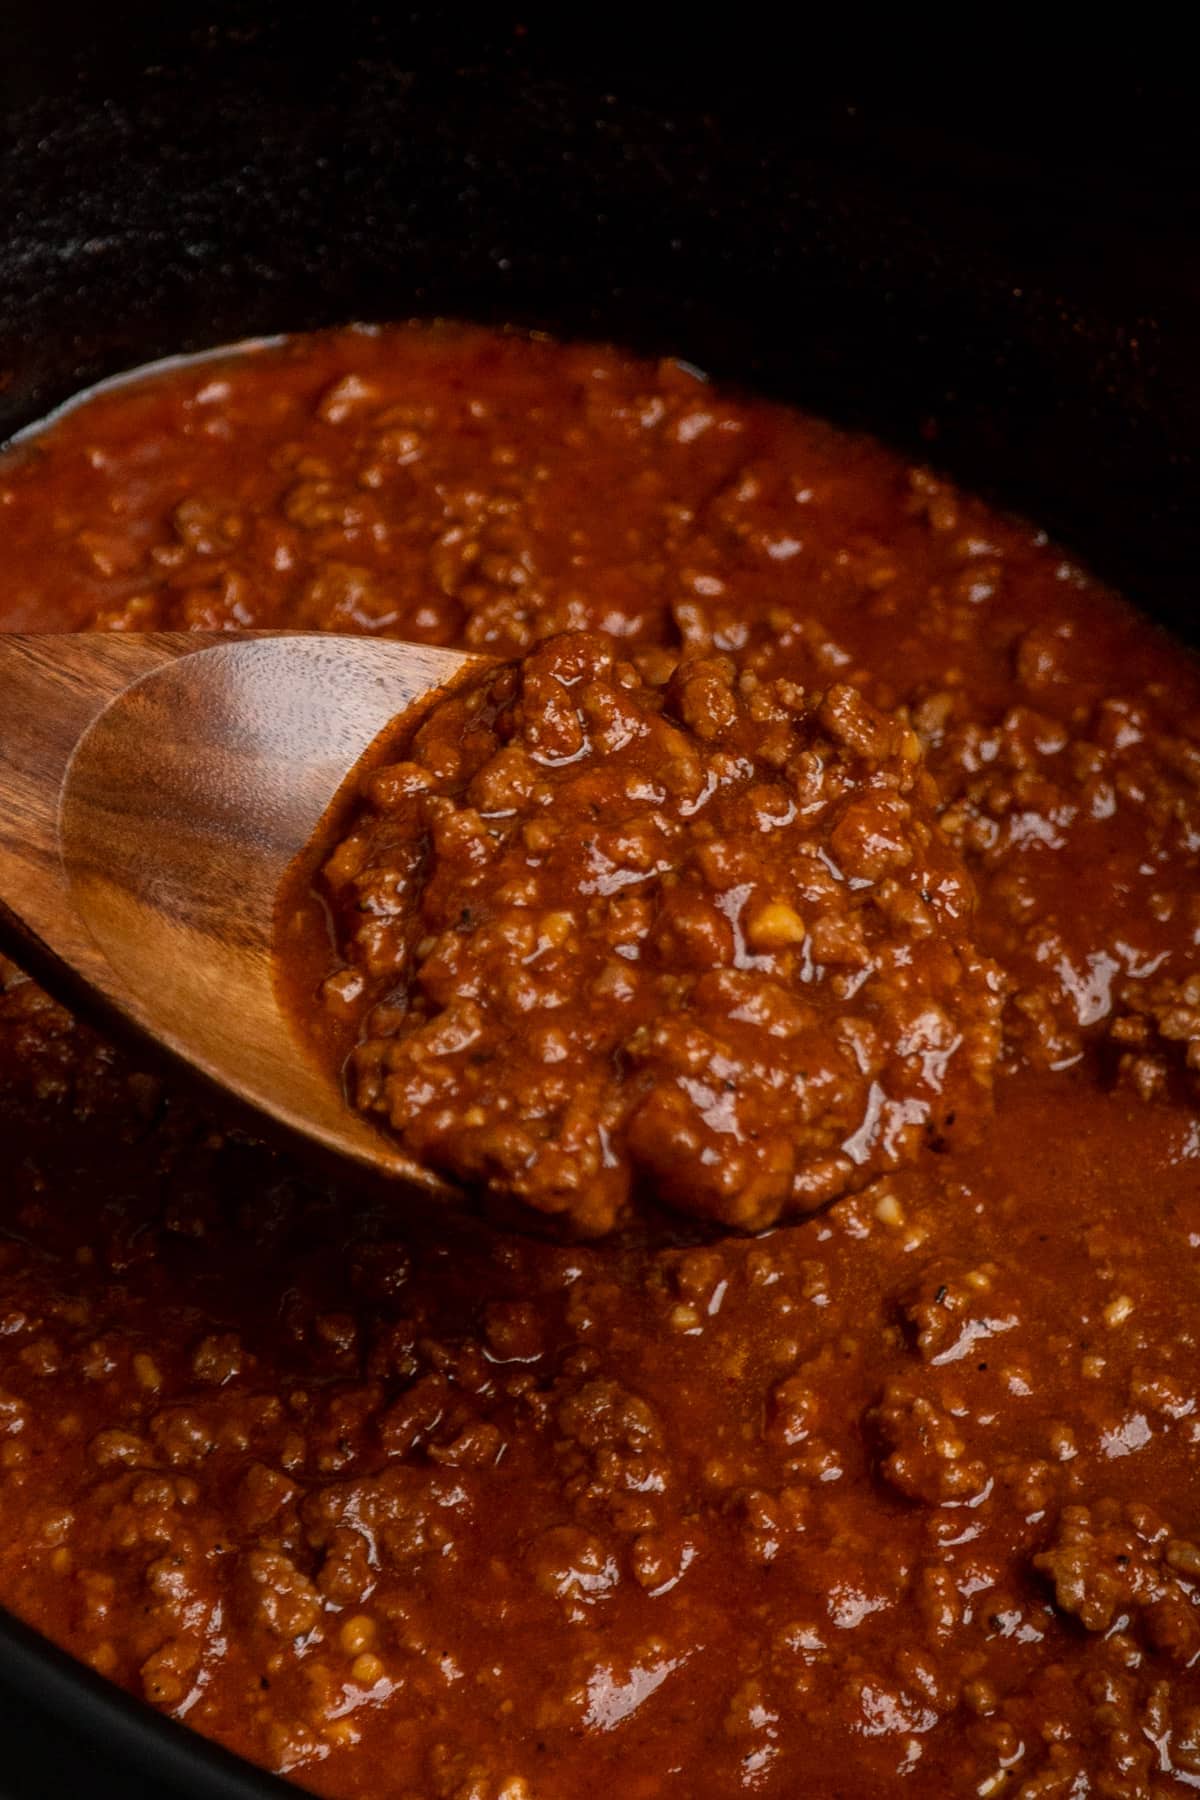 A woodend spoon with a scoop of hot dog chili from a crock pot.